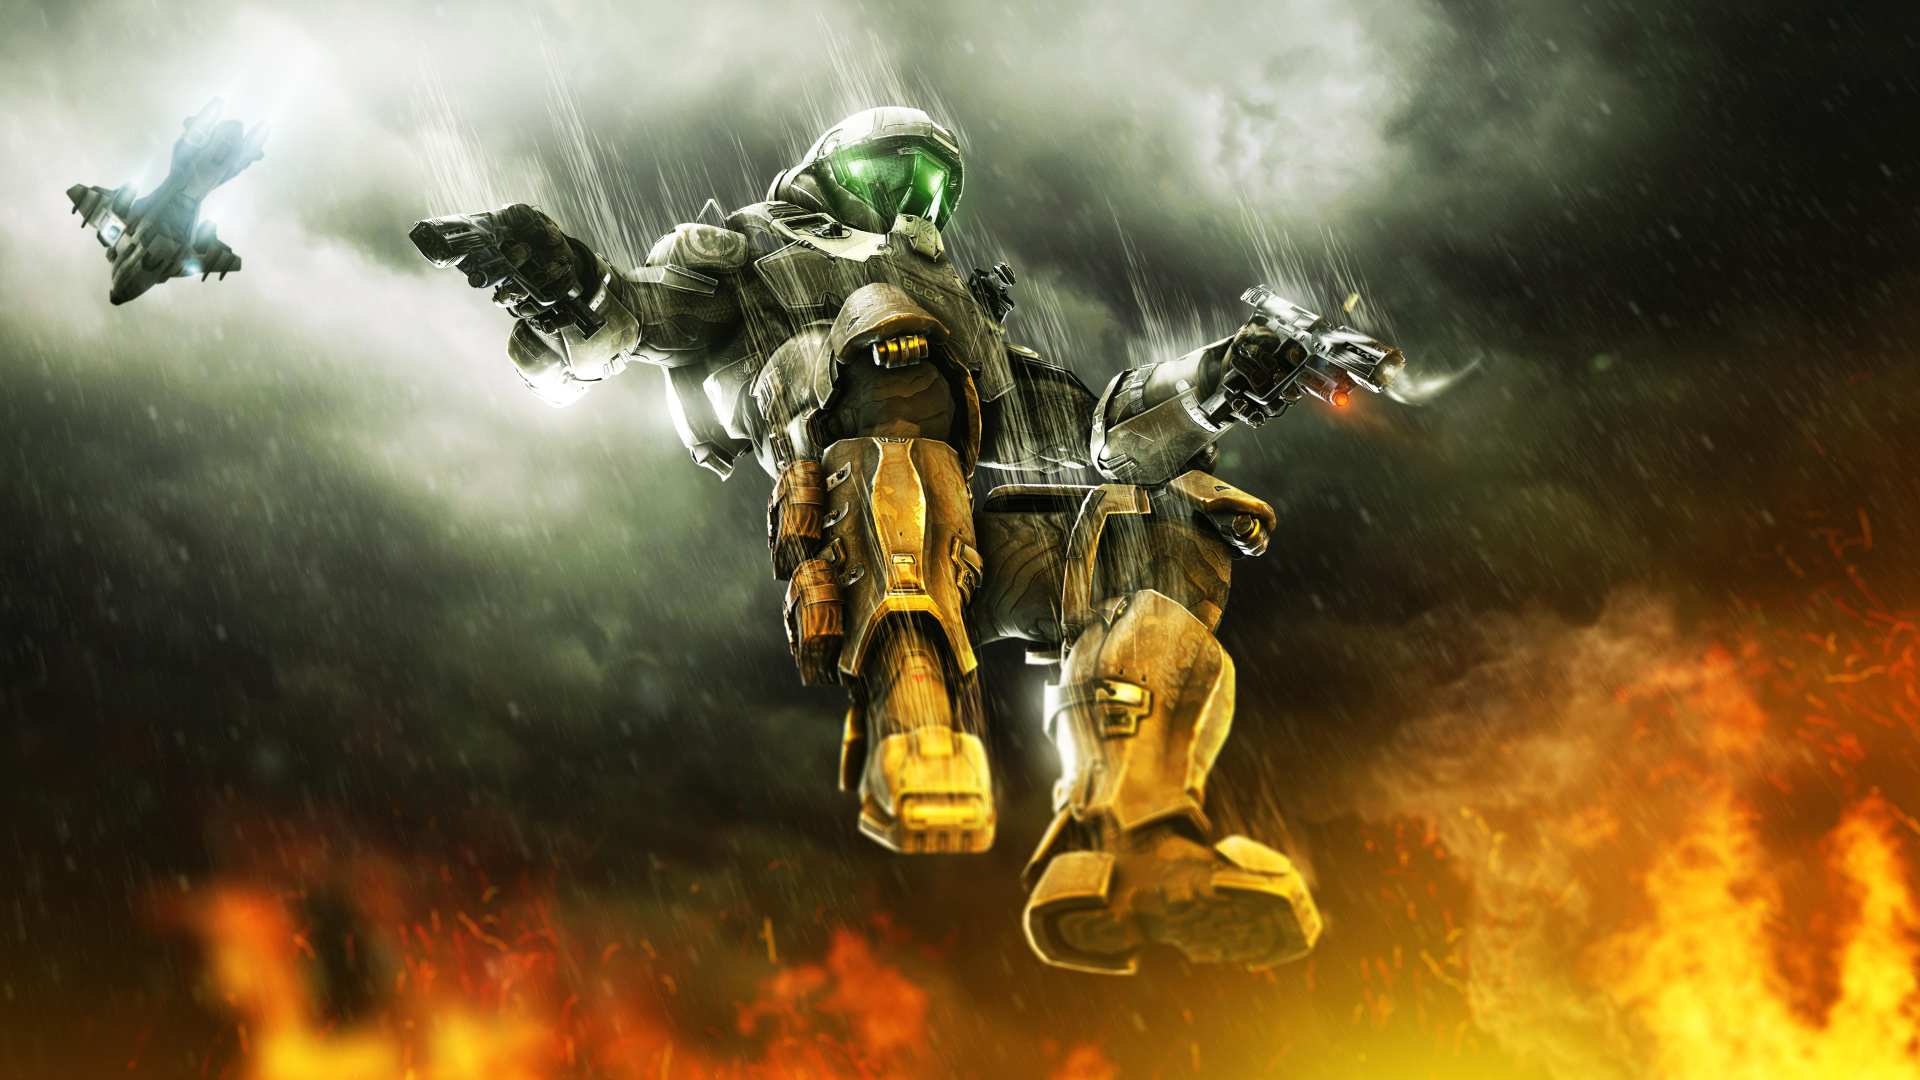 Halo 3, Master Chief, pc Game, Freestyle Motocross, Motocross. Wallpaper in 1920x1080 Resolution